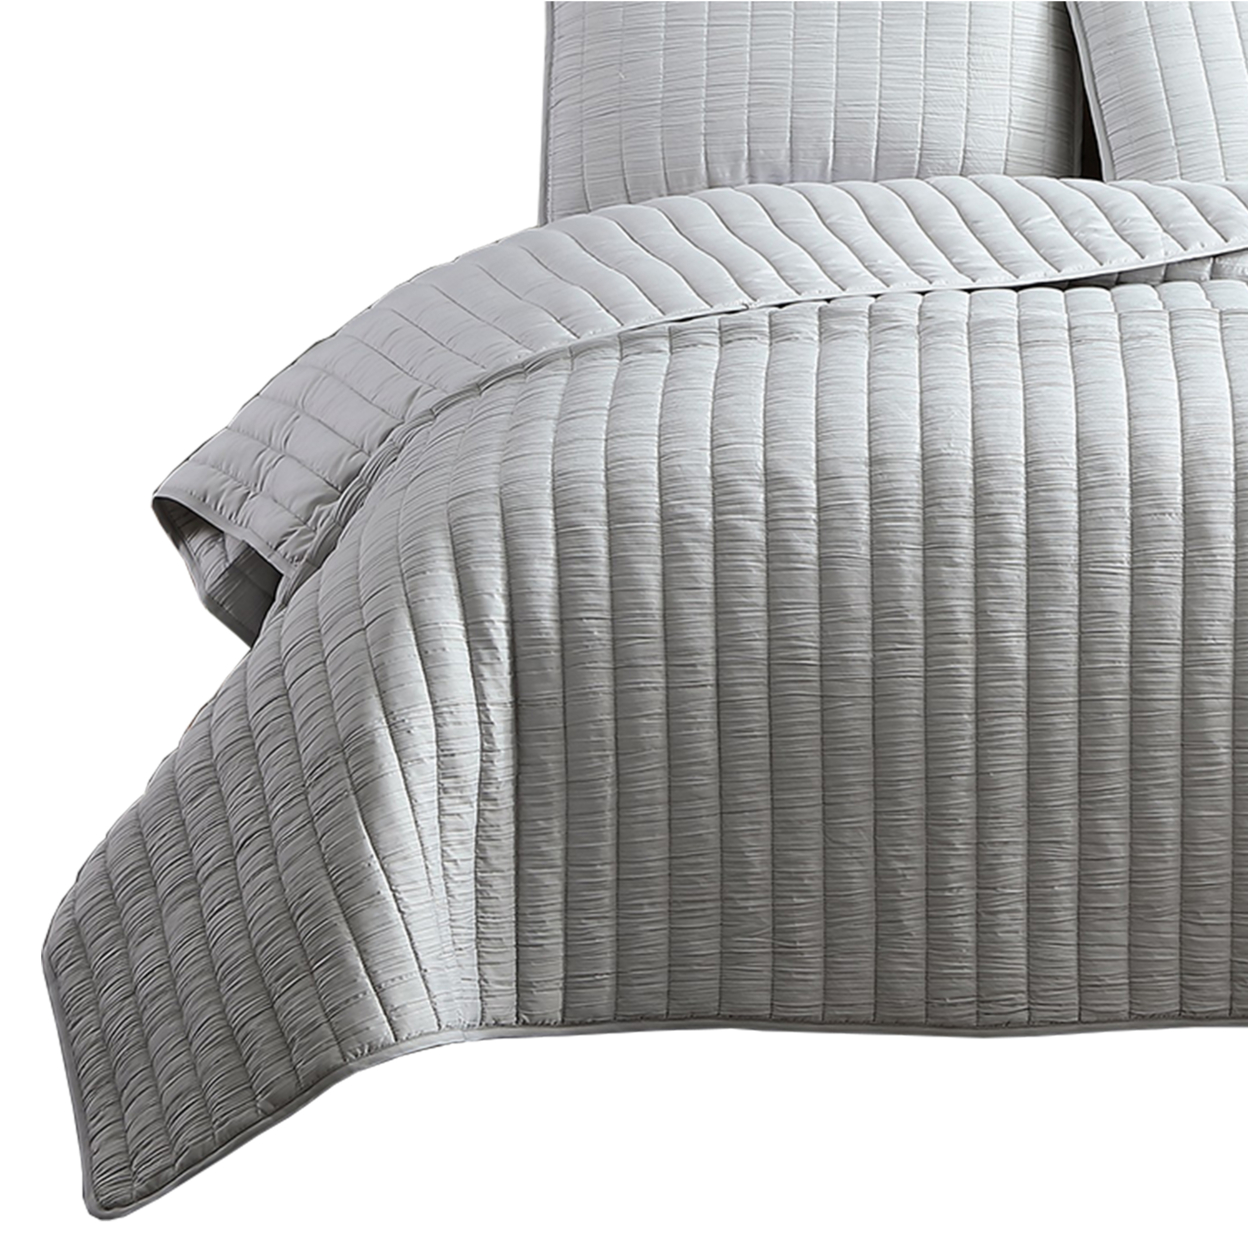 3 Piece Crinkle Queen Size Coverlet Set With Vertical Stitching,Light Gray- Saltoro Sherpi